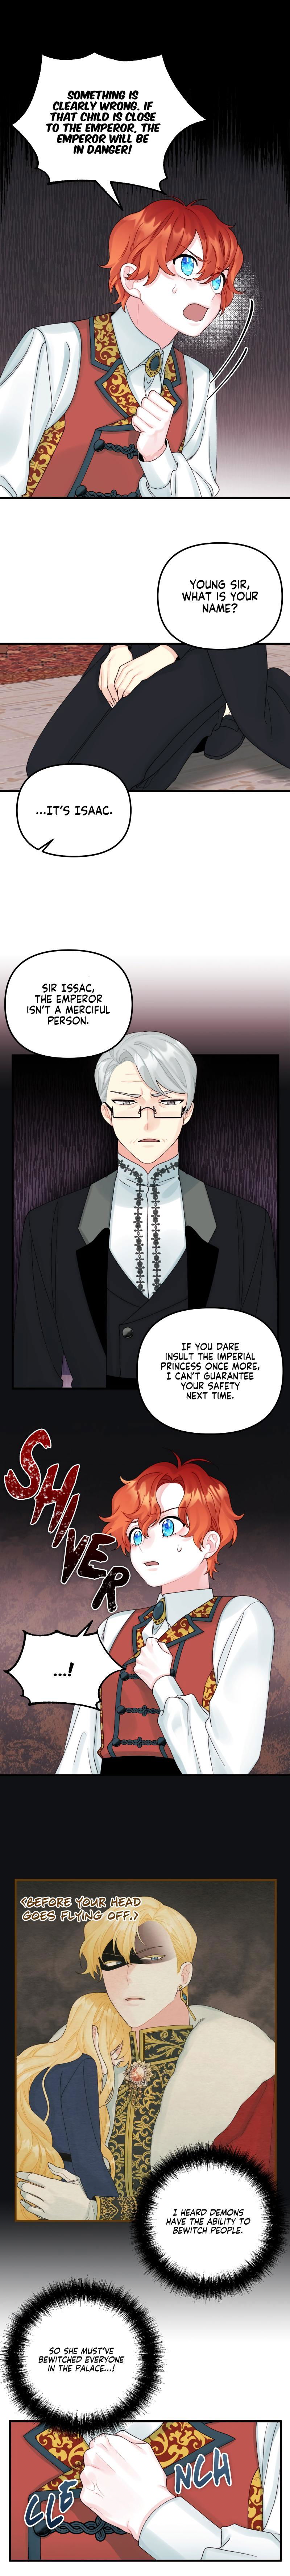 the-princess-in-the-dumpster-chap-38-3